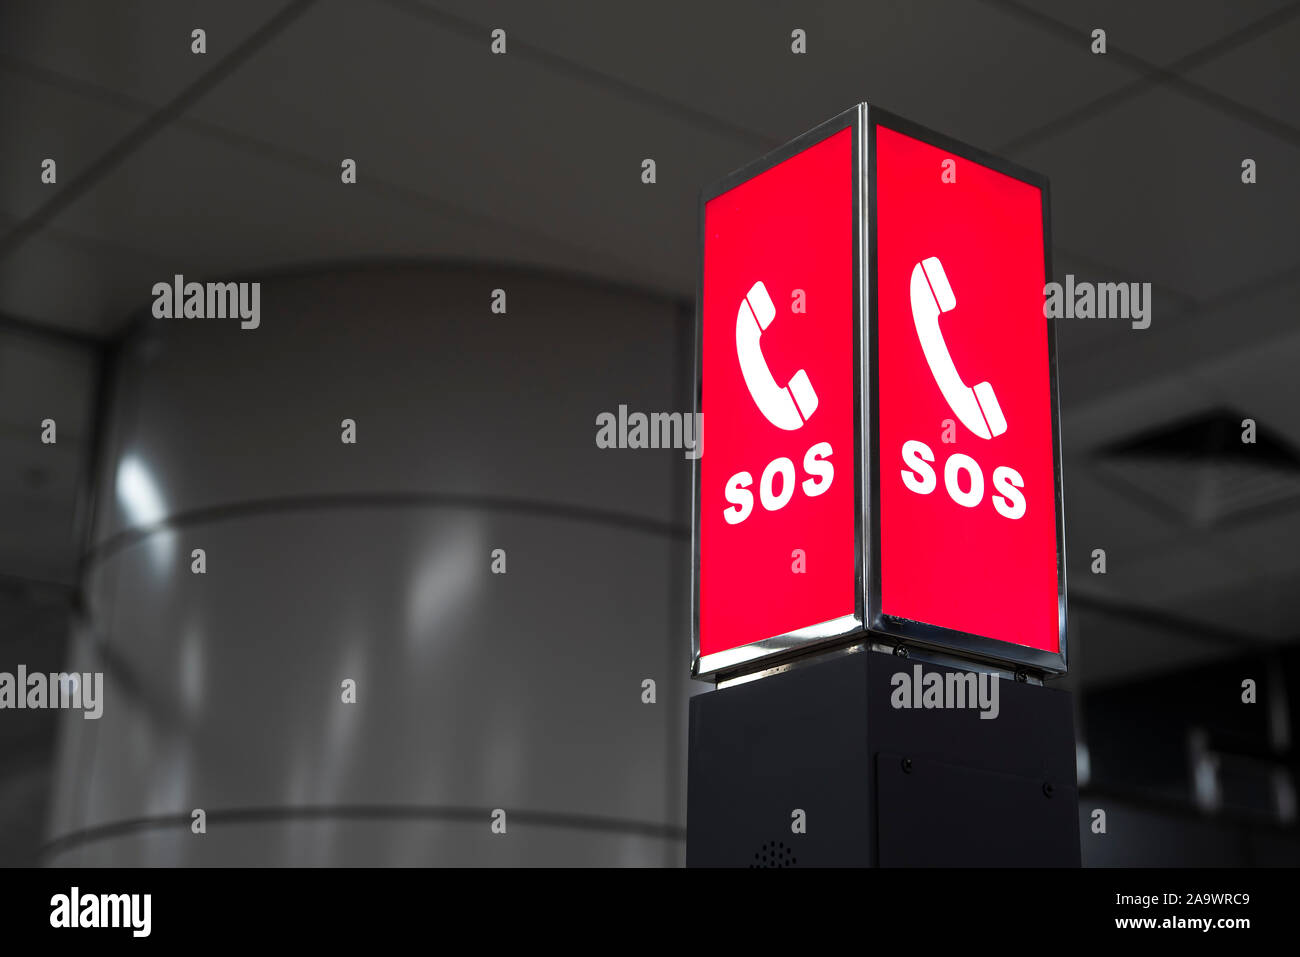 SOS emergency call information signs installed in public facilities. Stock Photo